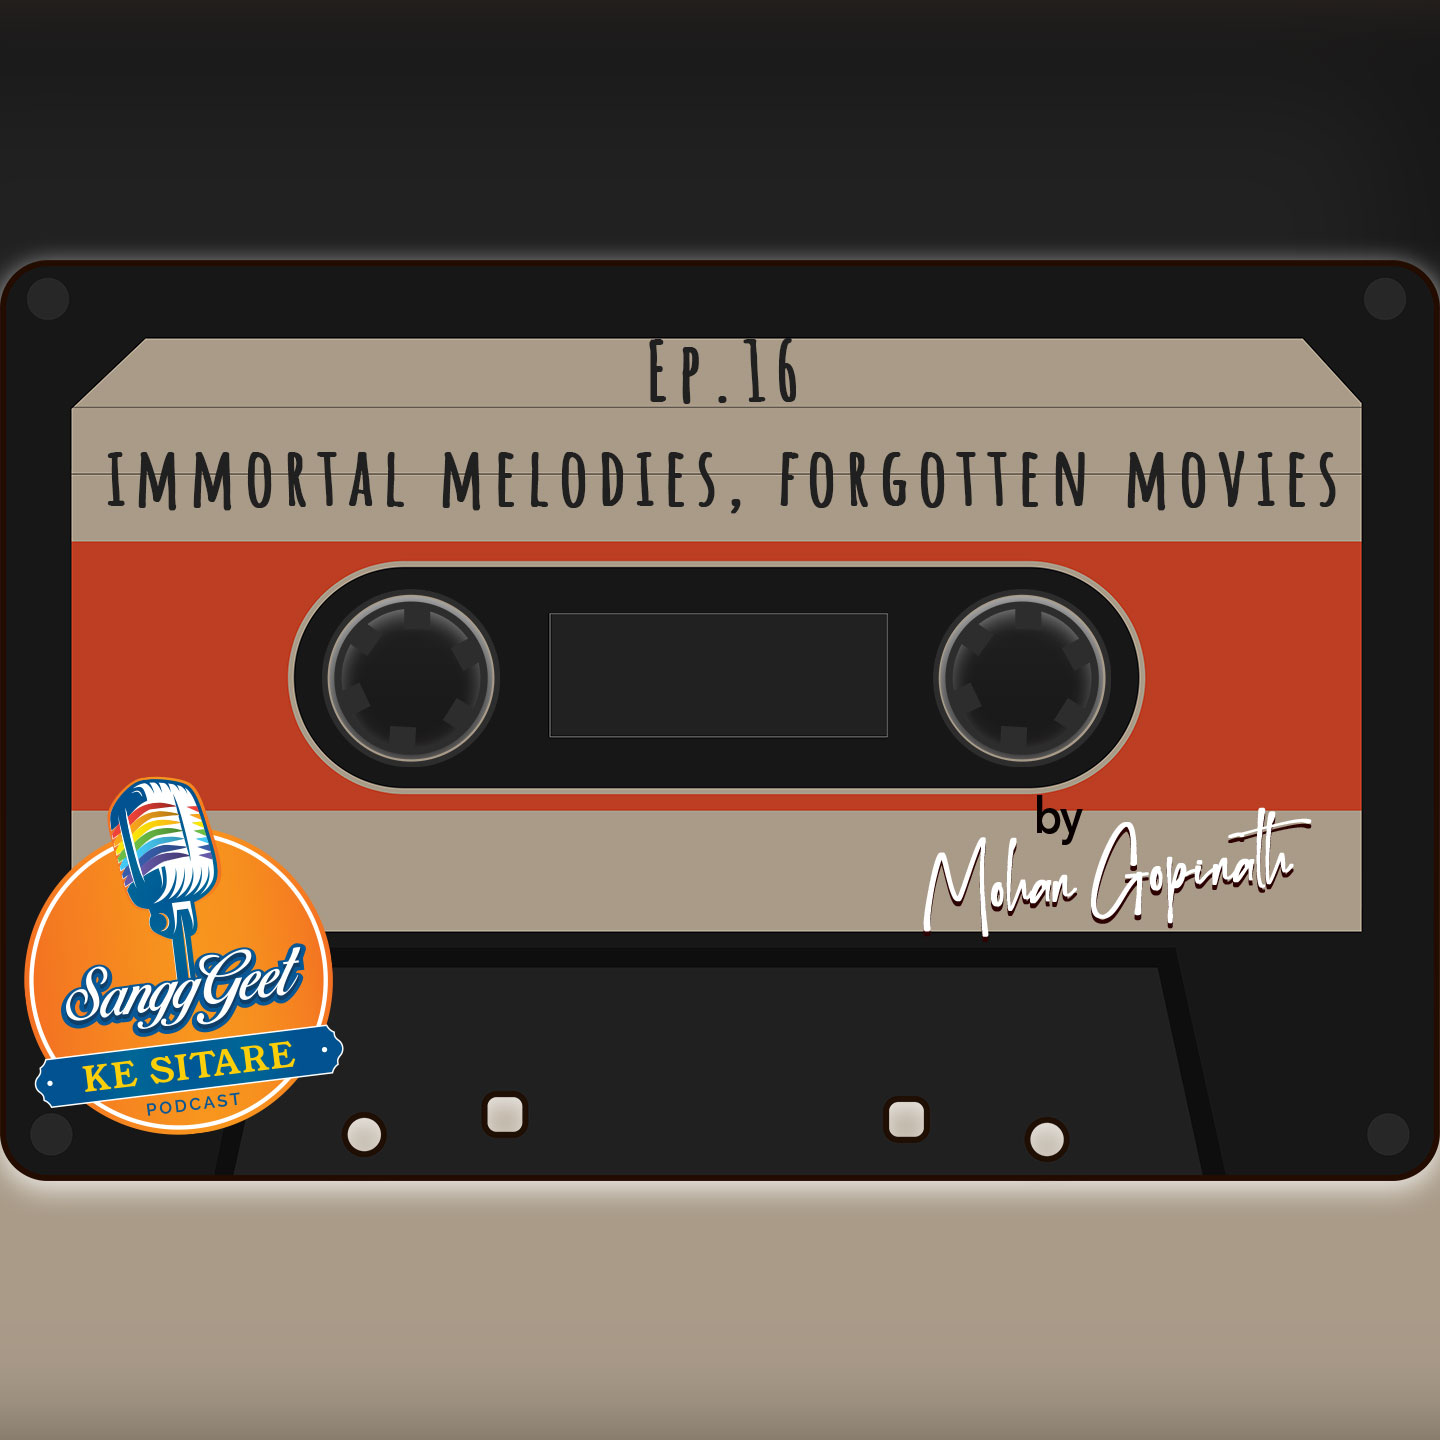 Ep.16 Immortal Melodies, Forgotten Movies